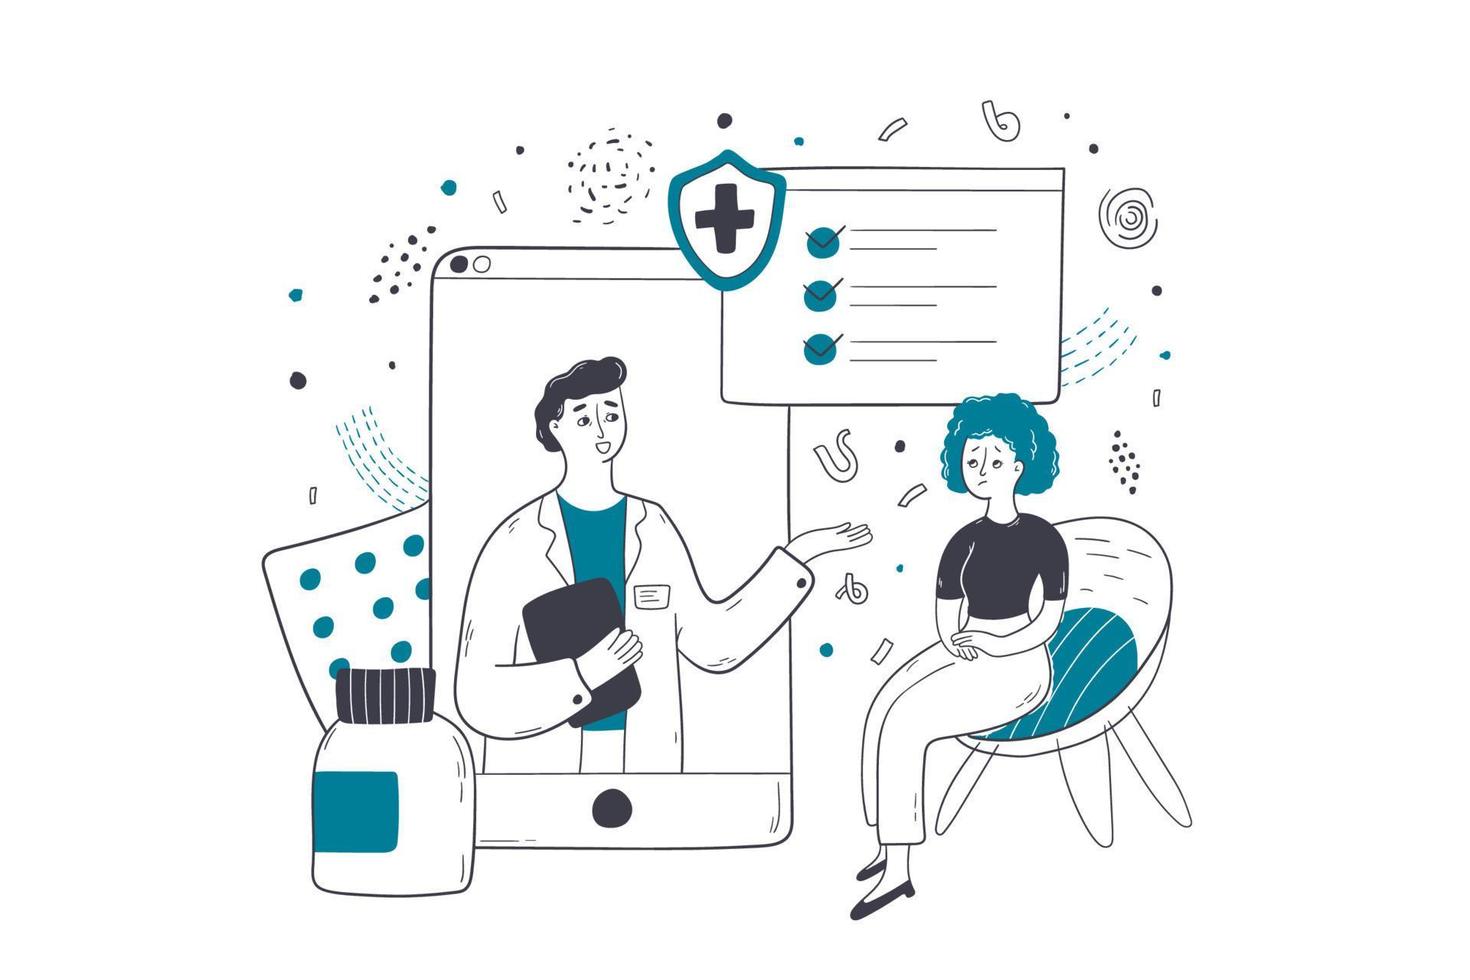 Health insurance, online medicine, consultation concept. Woman patient character communicating with man doctor hospital worker remotely filling medical document form. Healthcare support Illustration. vector